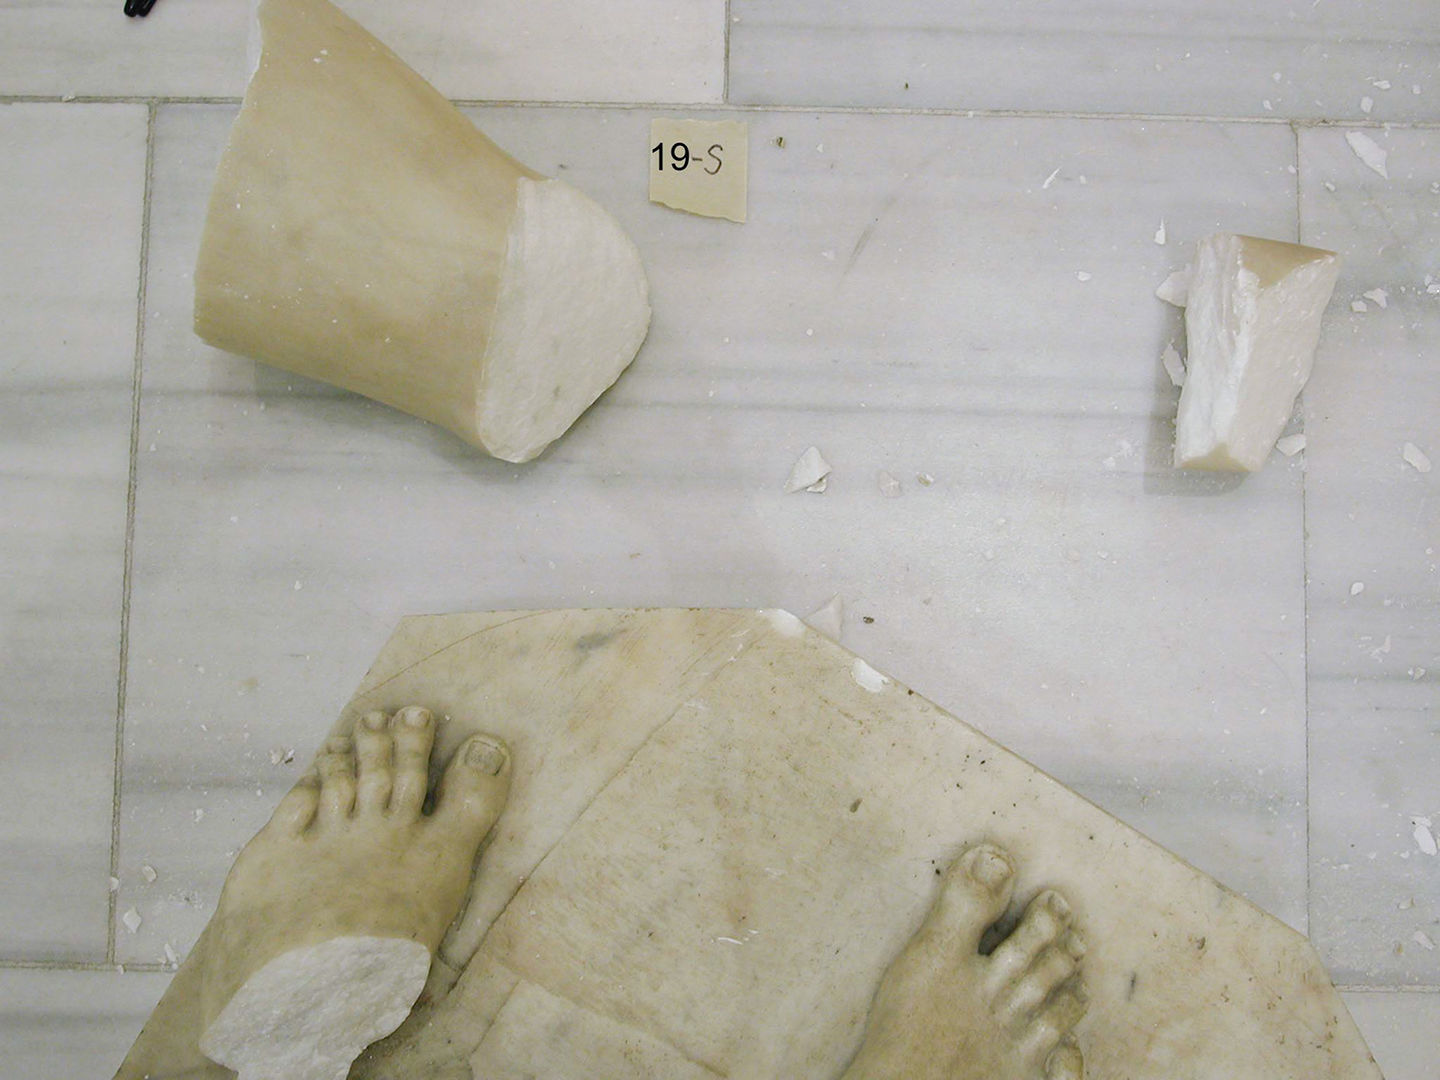 Fragments of Adam against a gray tile floor. Larger pieces show the breakage at his feet and parts of his appendages, and are surrounded by tiny pieces of marble.